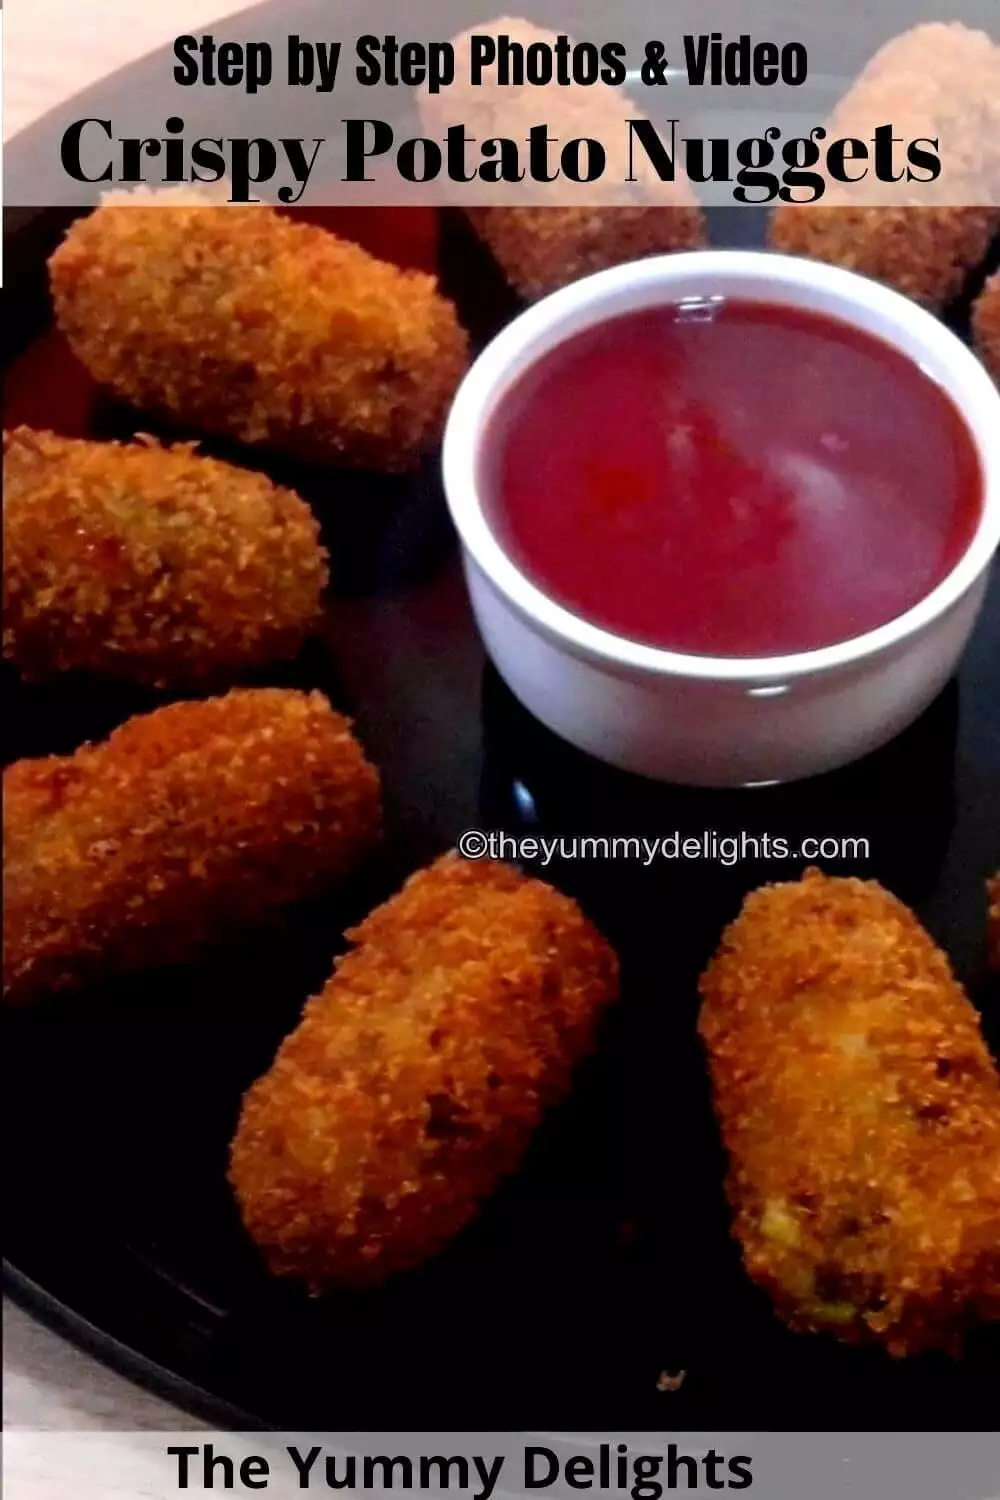 close-up of crispy potato nuggets served in a black colored plate.